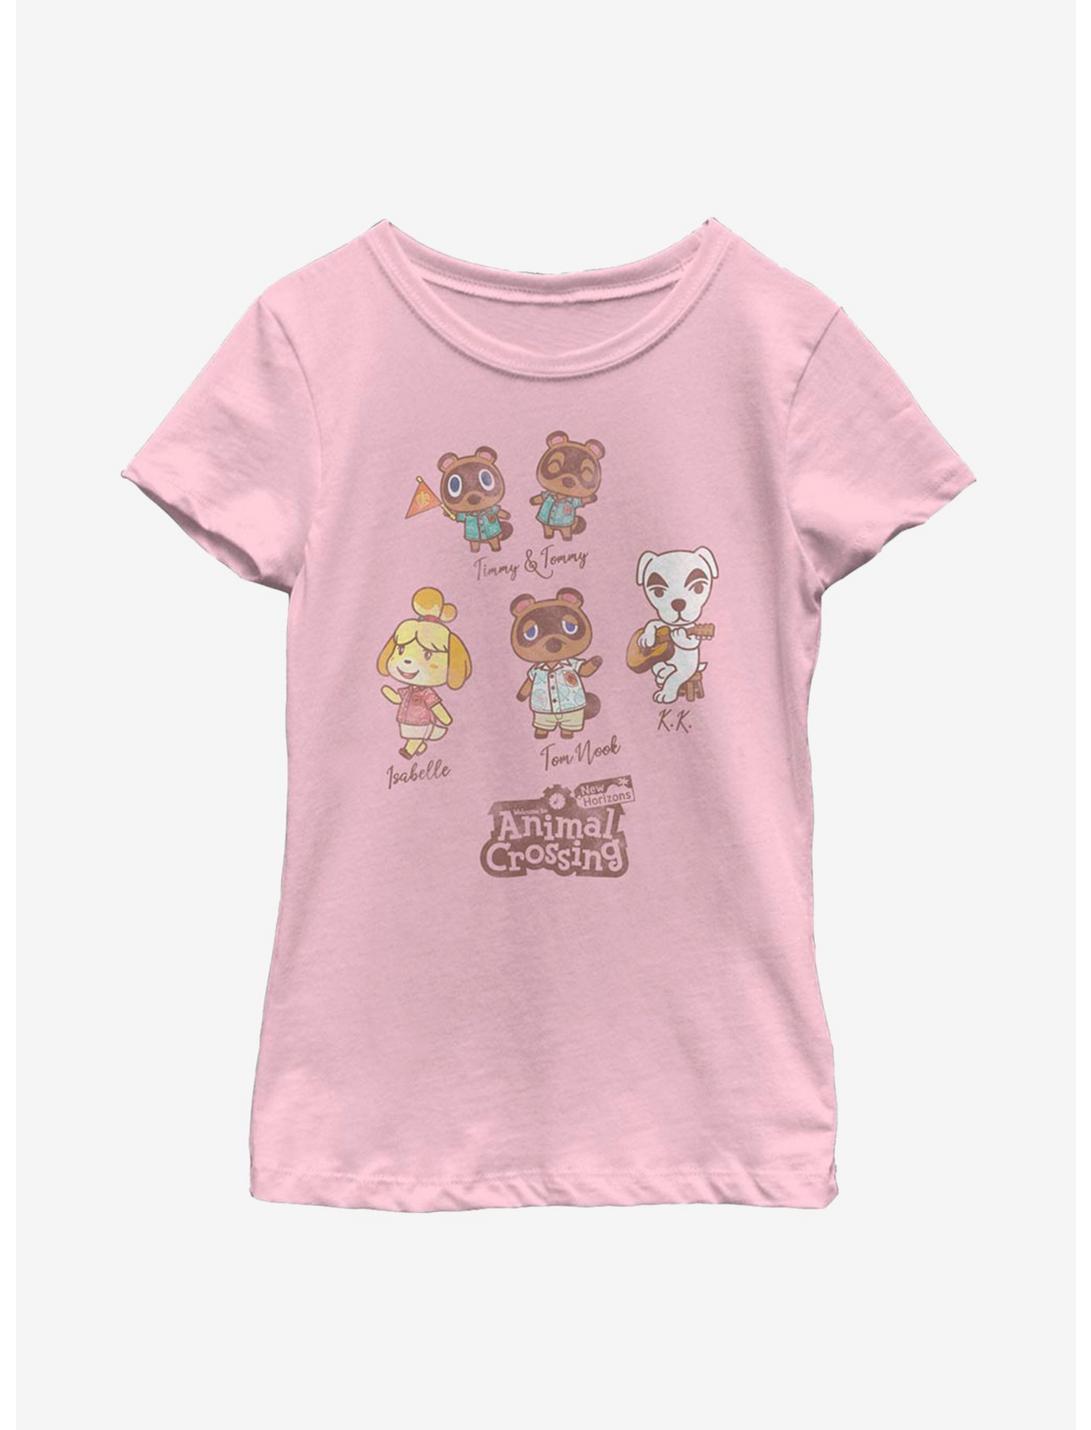 Animal Crossing Character Textbook Youth Girls T-Shirt, PINK, hi-res